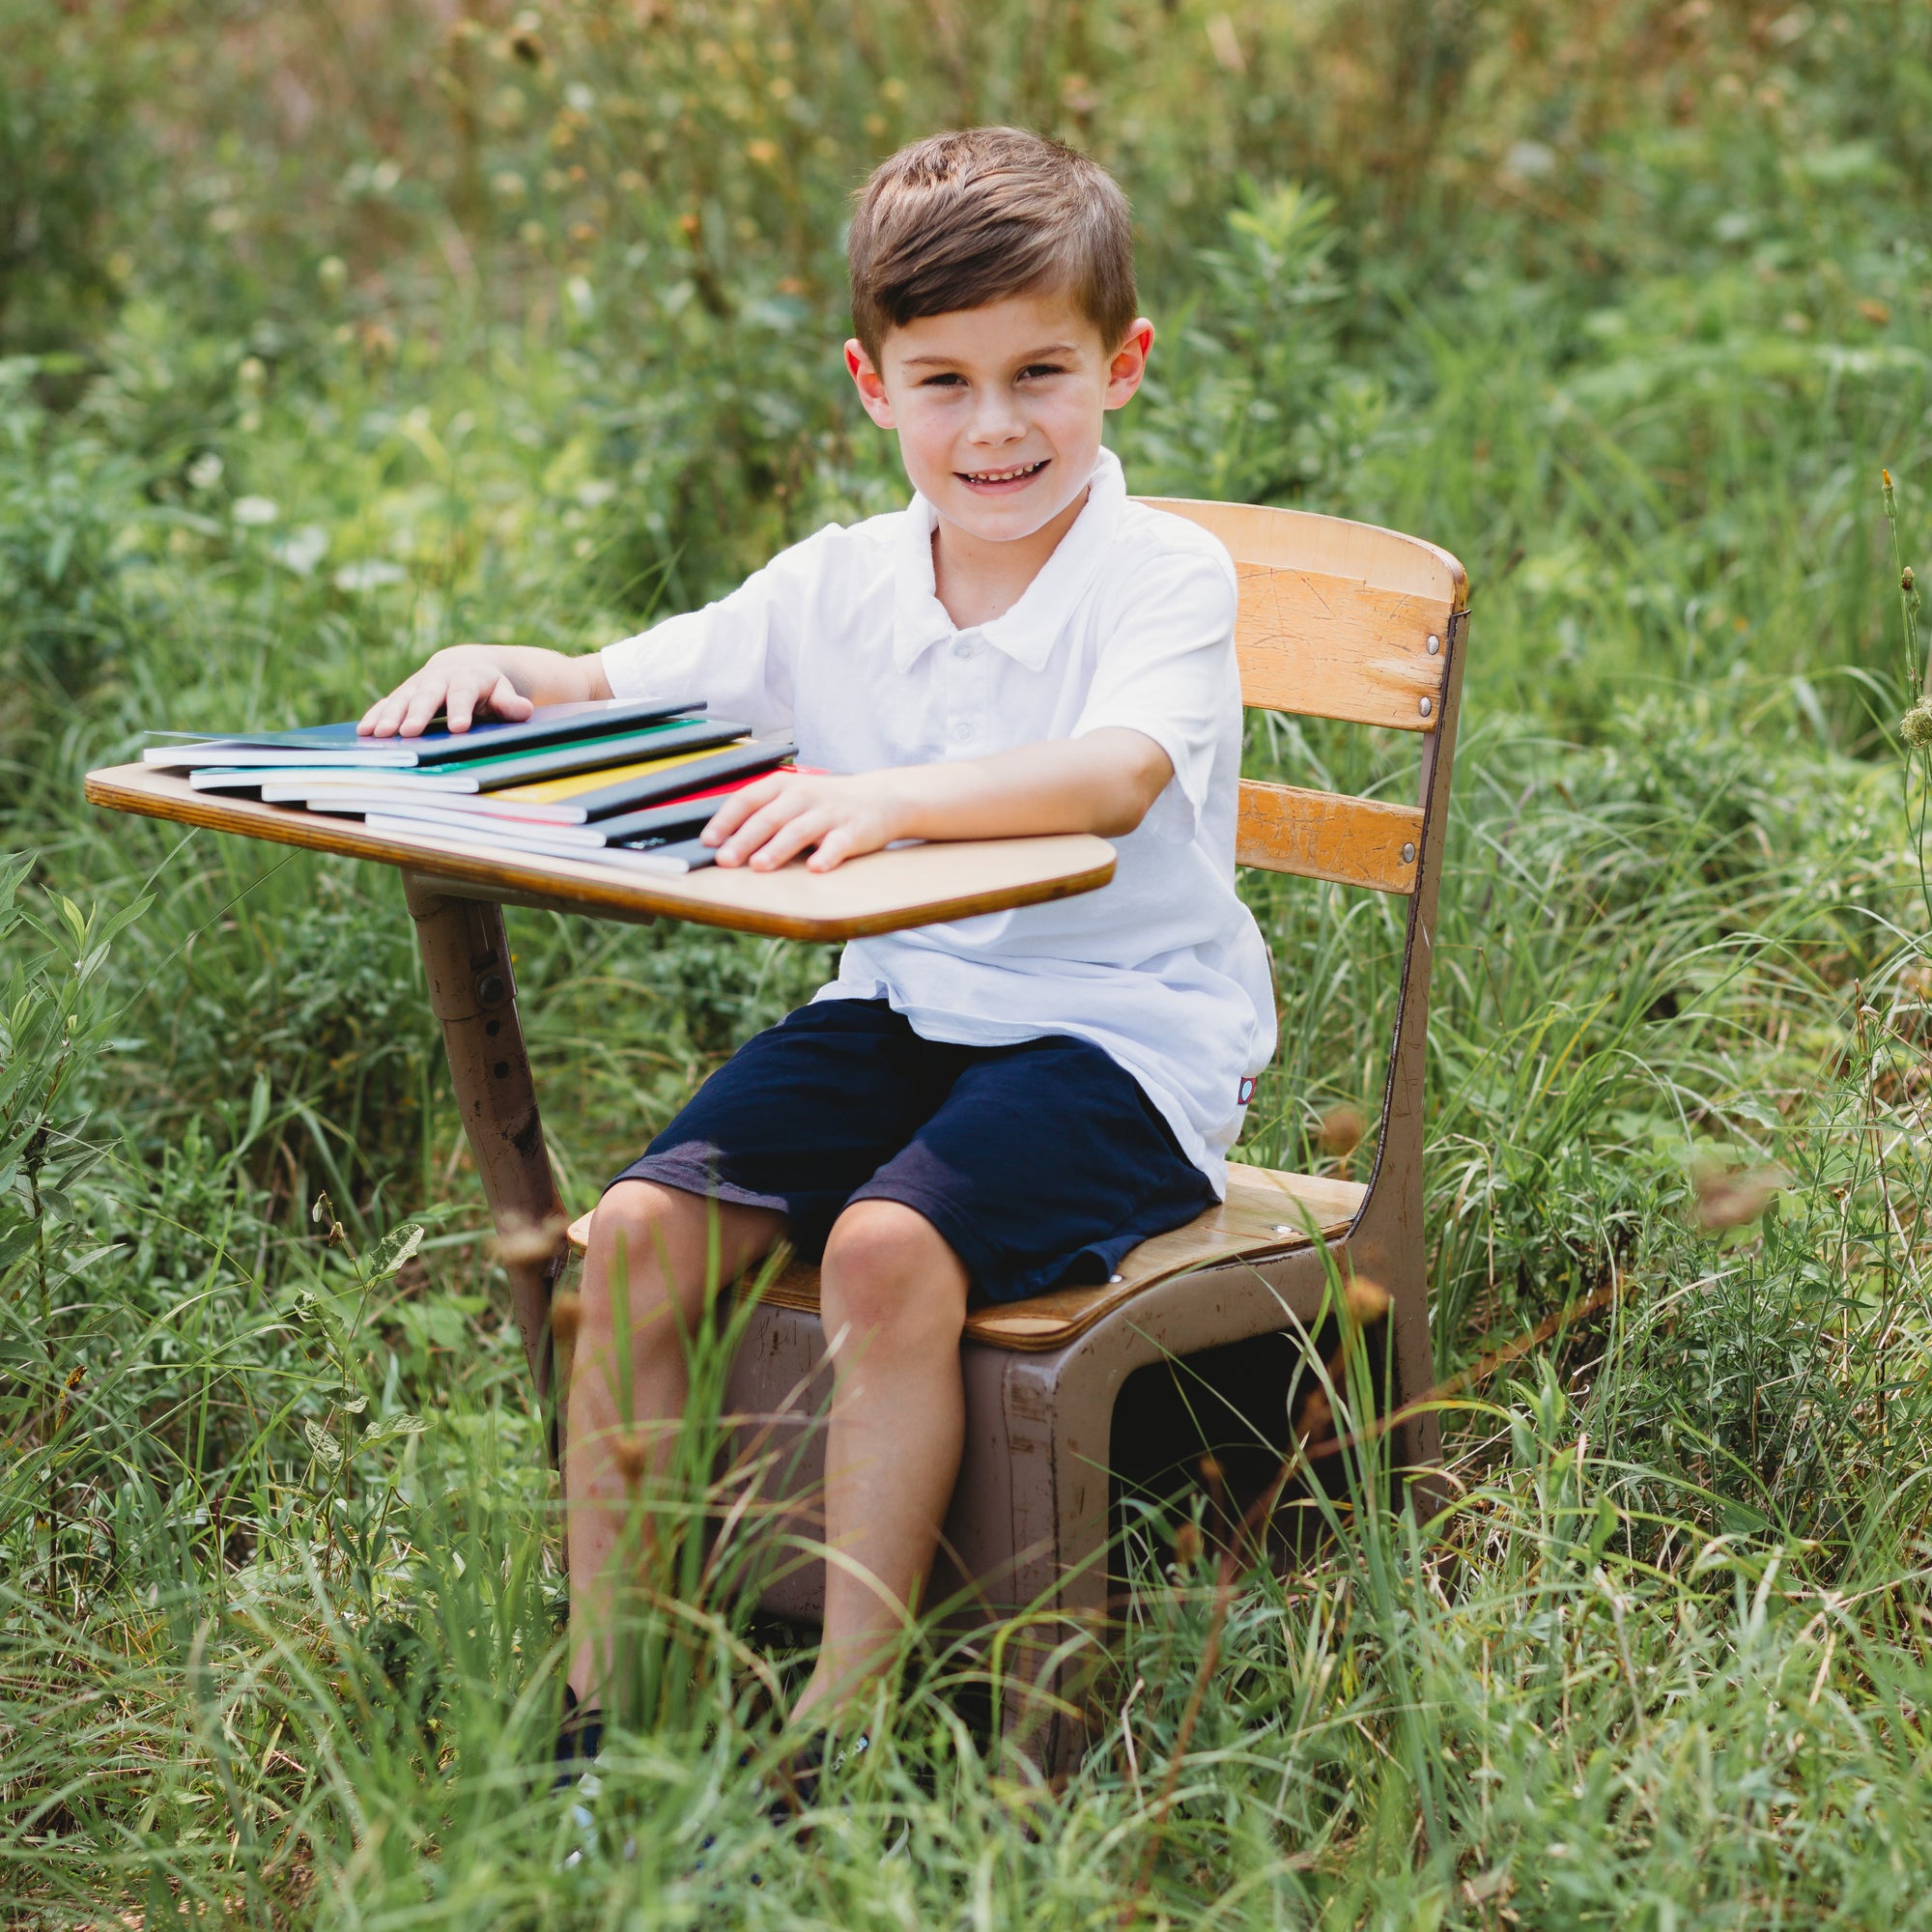 What Clothing Should I Buy For My Kids To Attend Waldorf School?